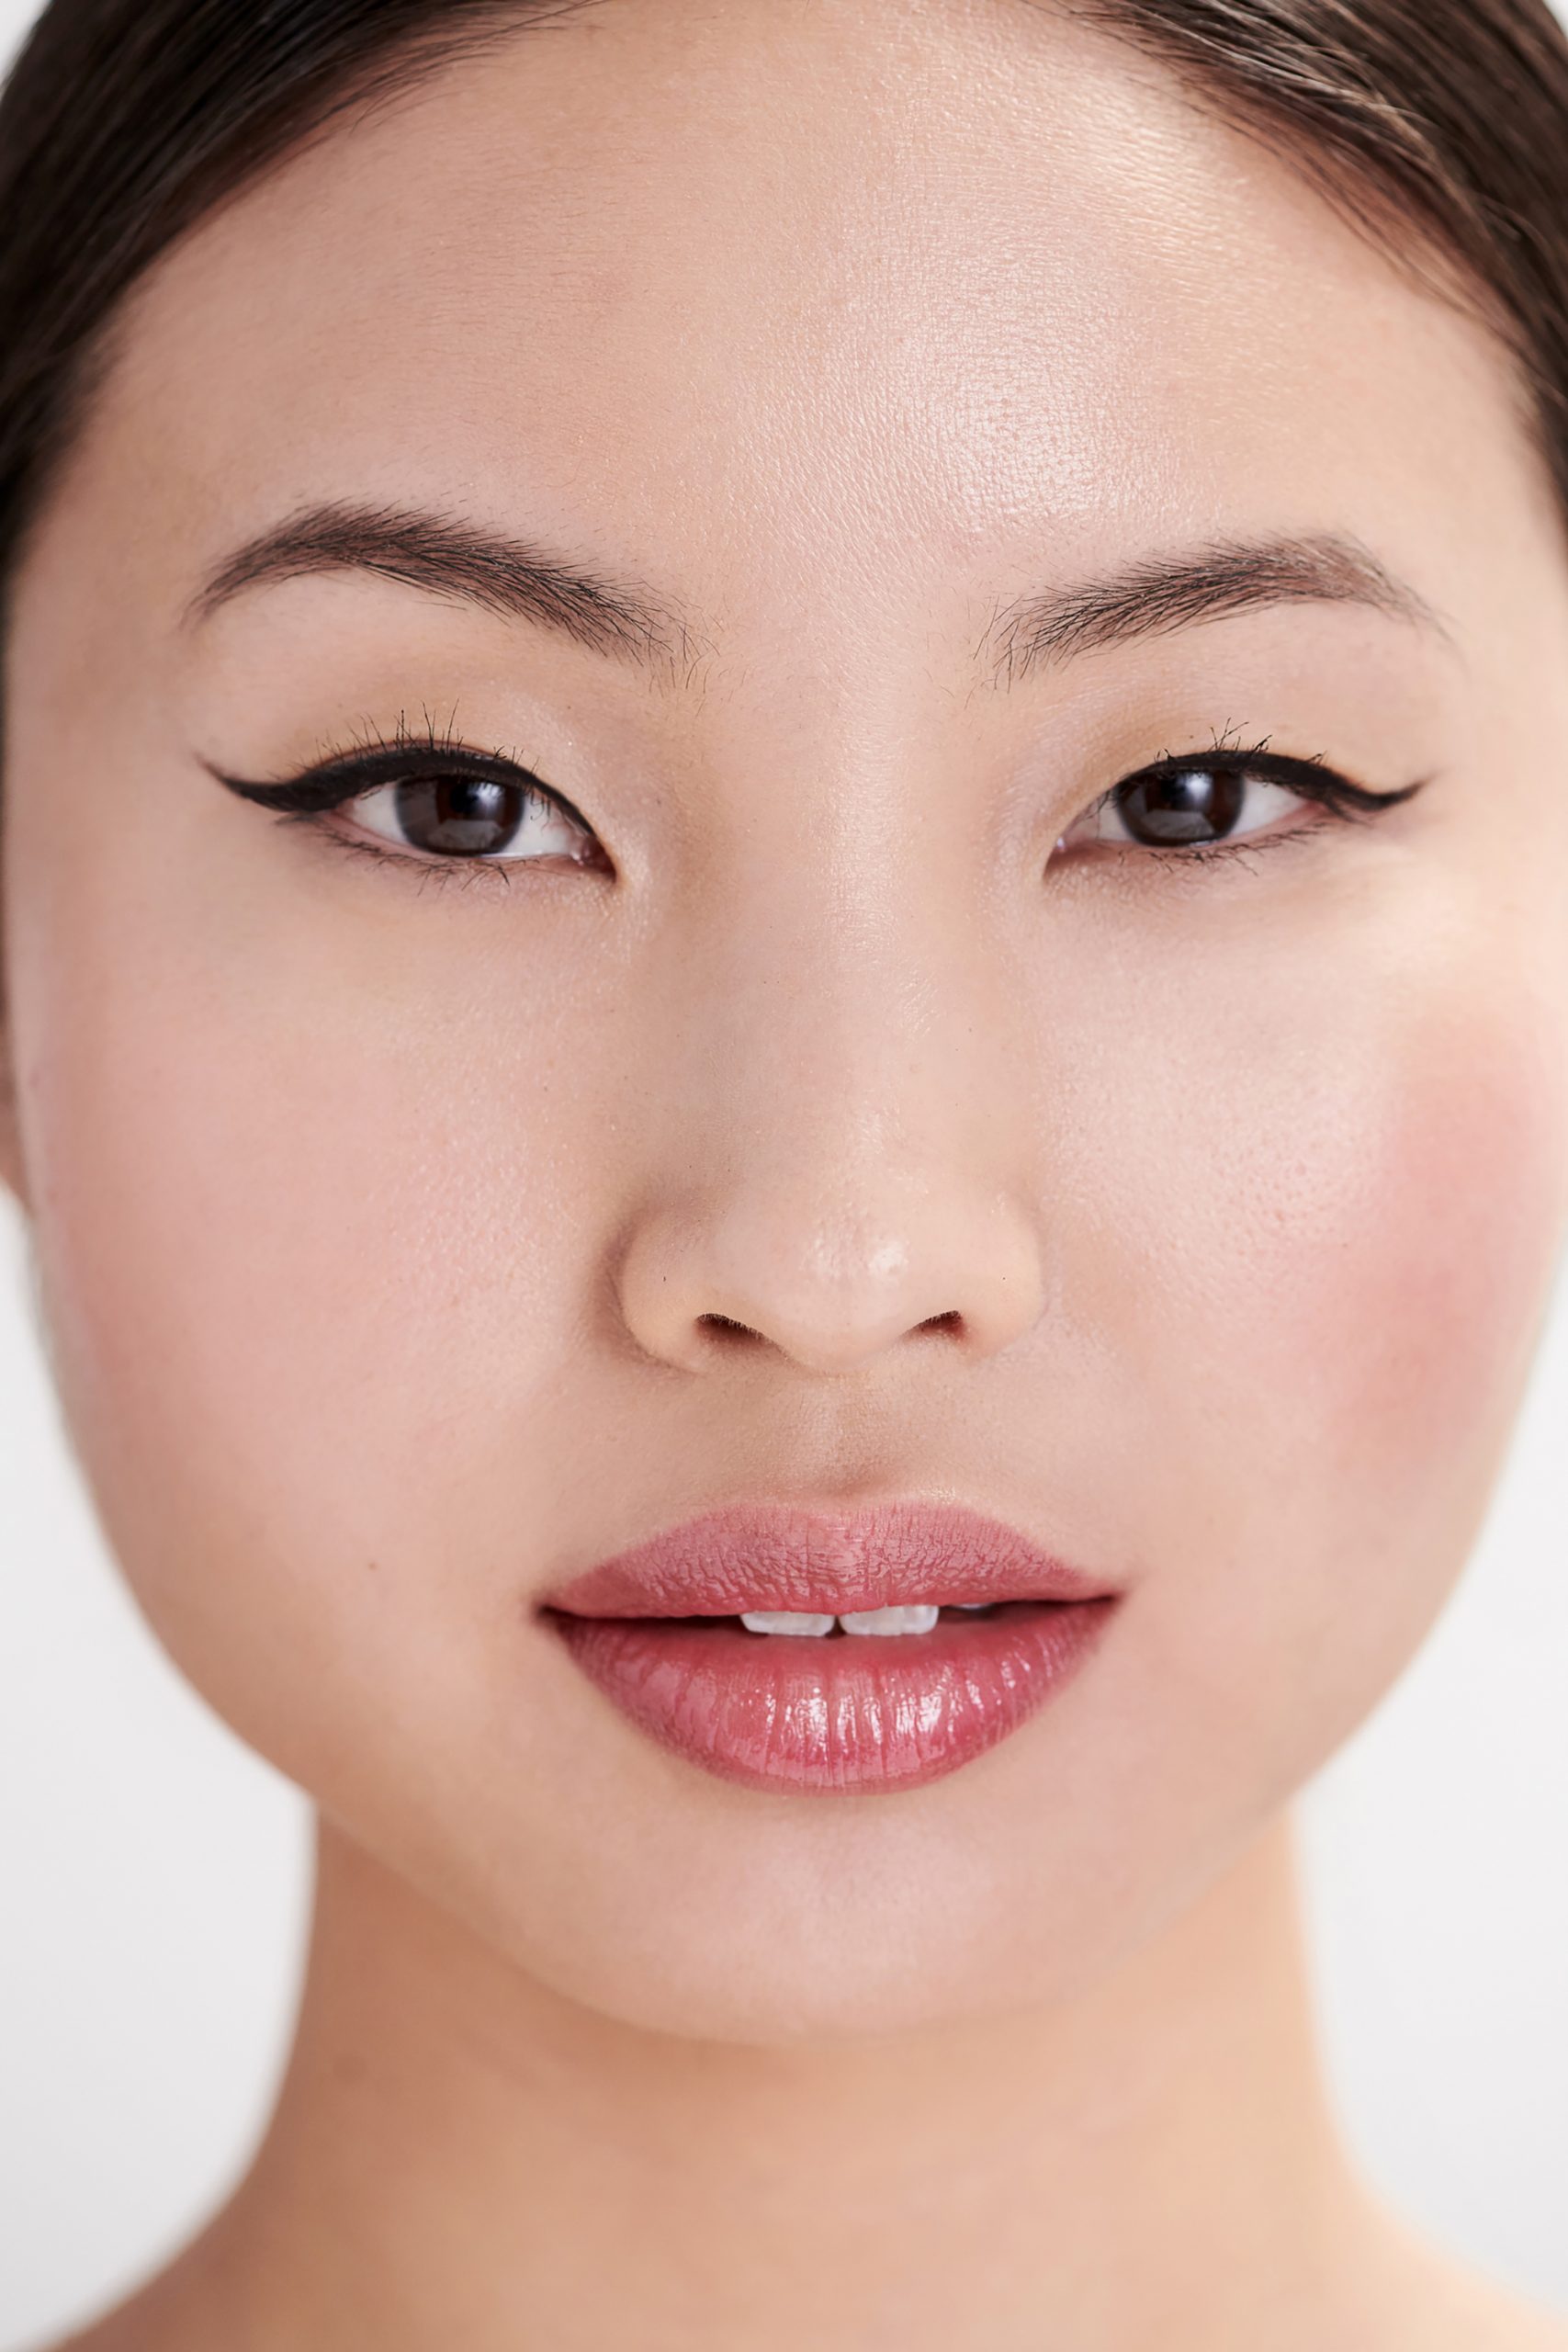 5 Brow Problems and How to Solve Them